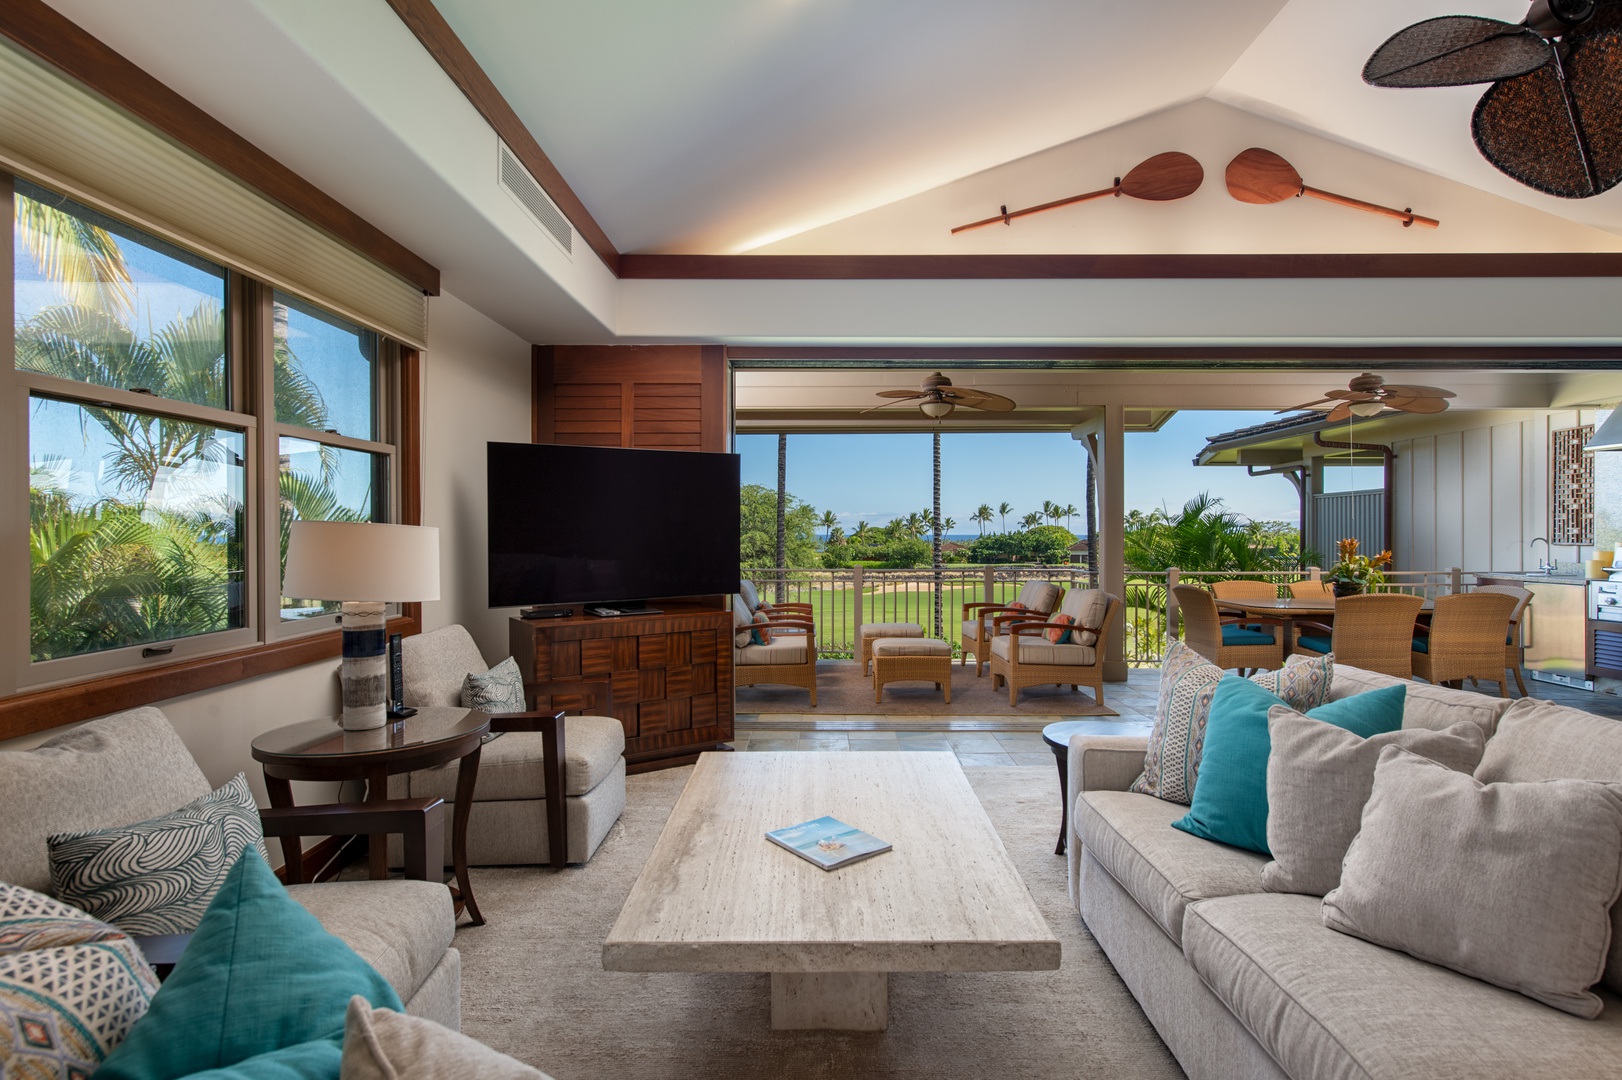 Kailua Kona Vacation Rentals, 3BD Ka'Ulu Villa (109A) at Four Seasons Resort at Hualalai - Lounge in the open living area and never miss an episode of your favorite show.